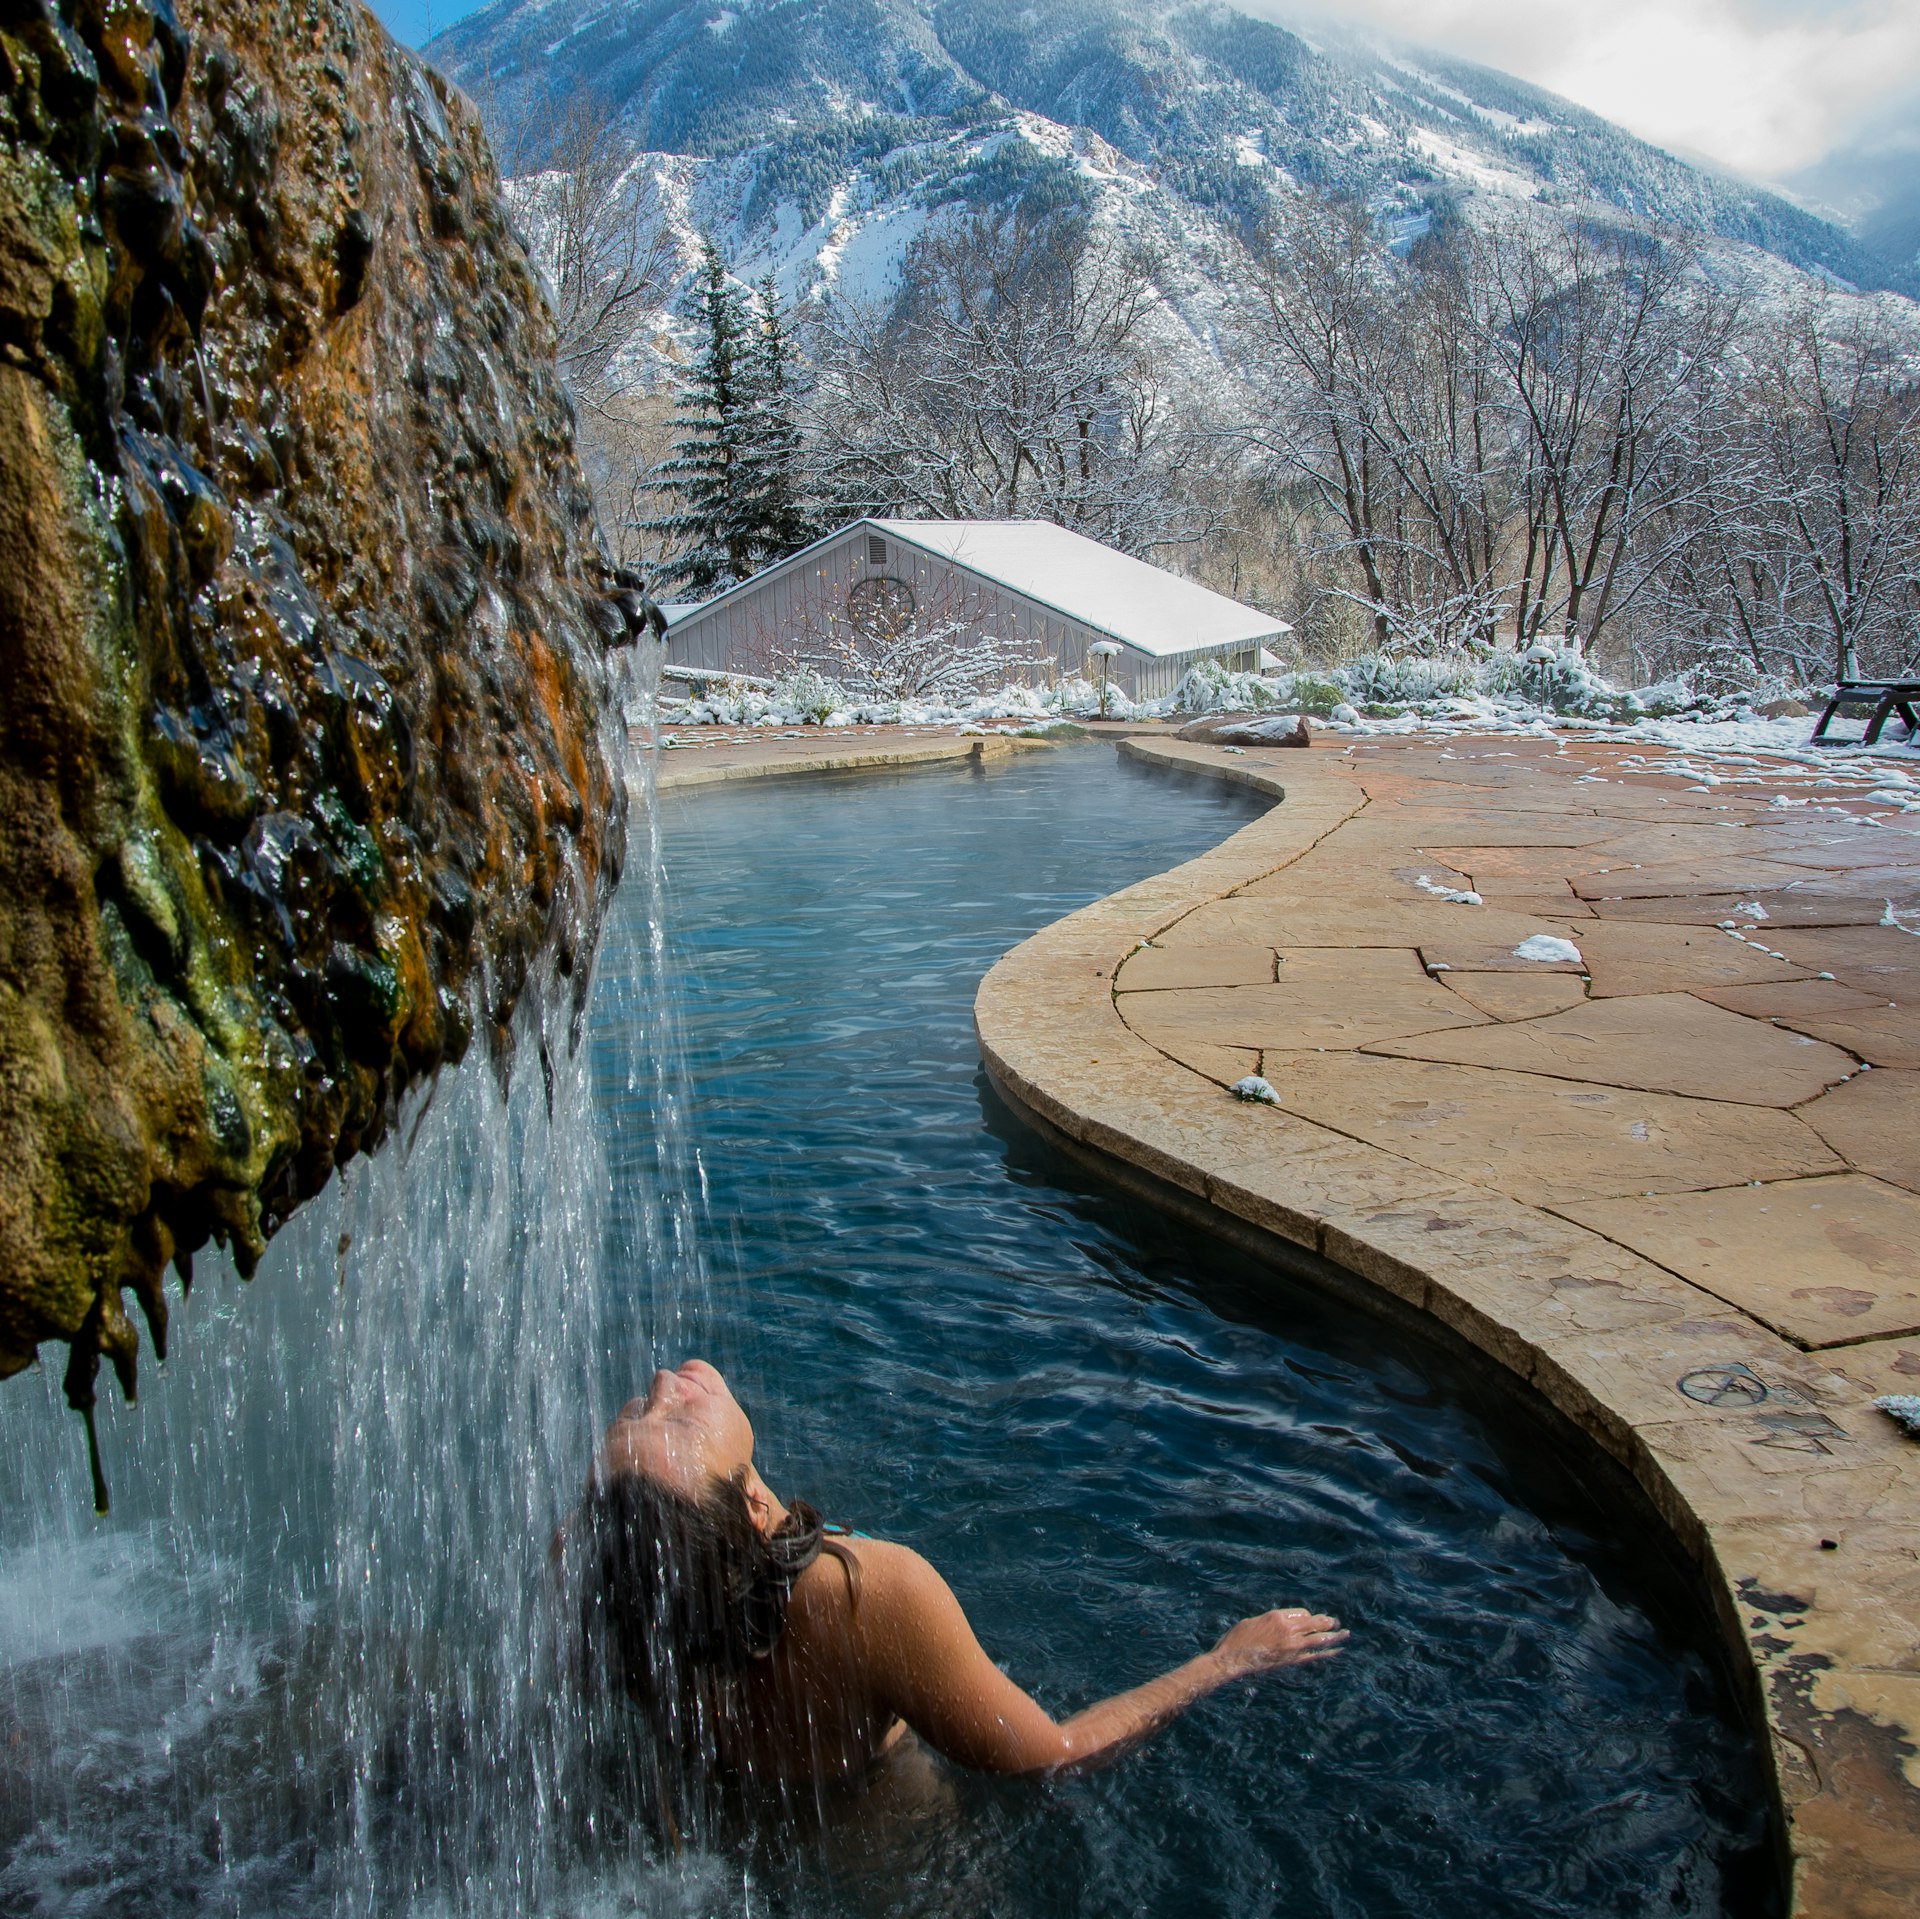 A woman leans back into a waterfall at a natural hot spring at Avalanche Ranch Hot Springs, Colorado, USA